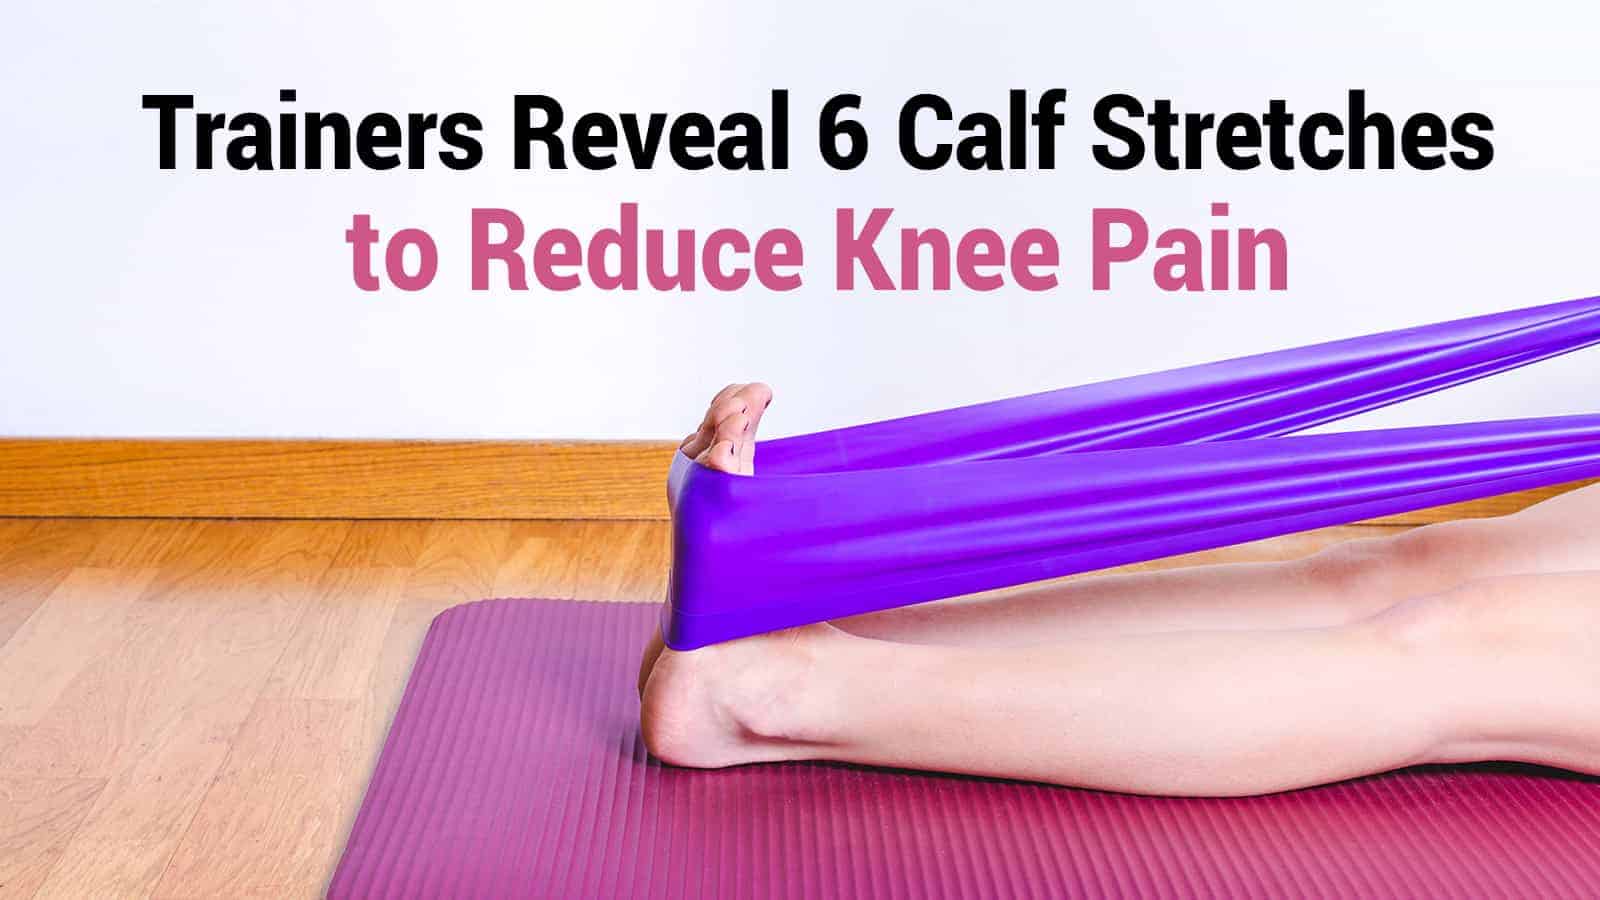 Trainers Reveal 6 Calf Stretches to Reduce Knee Pain